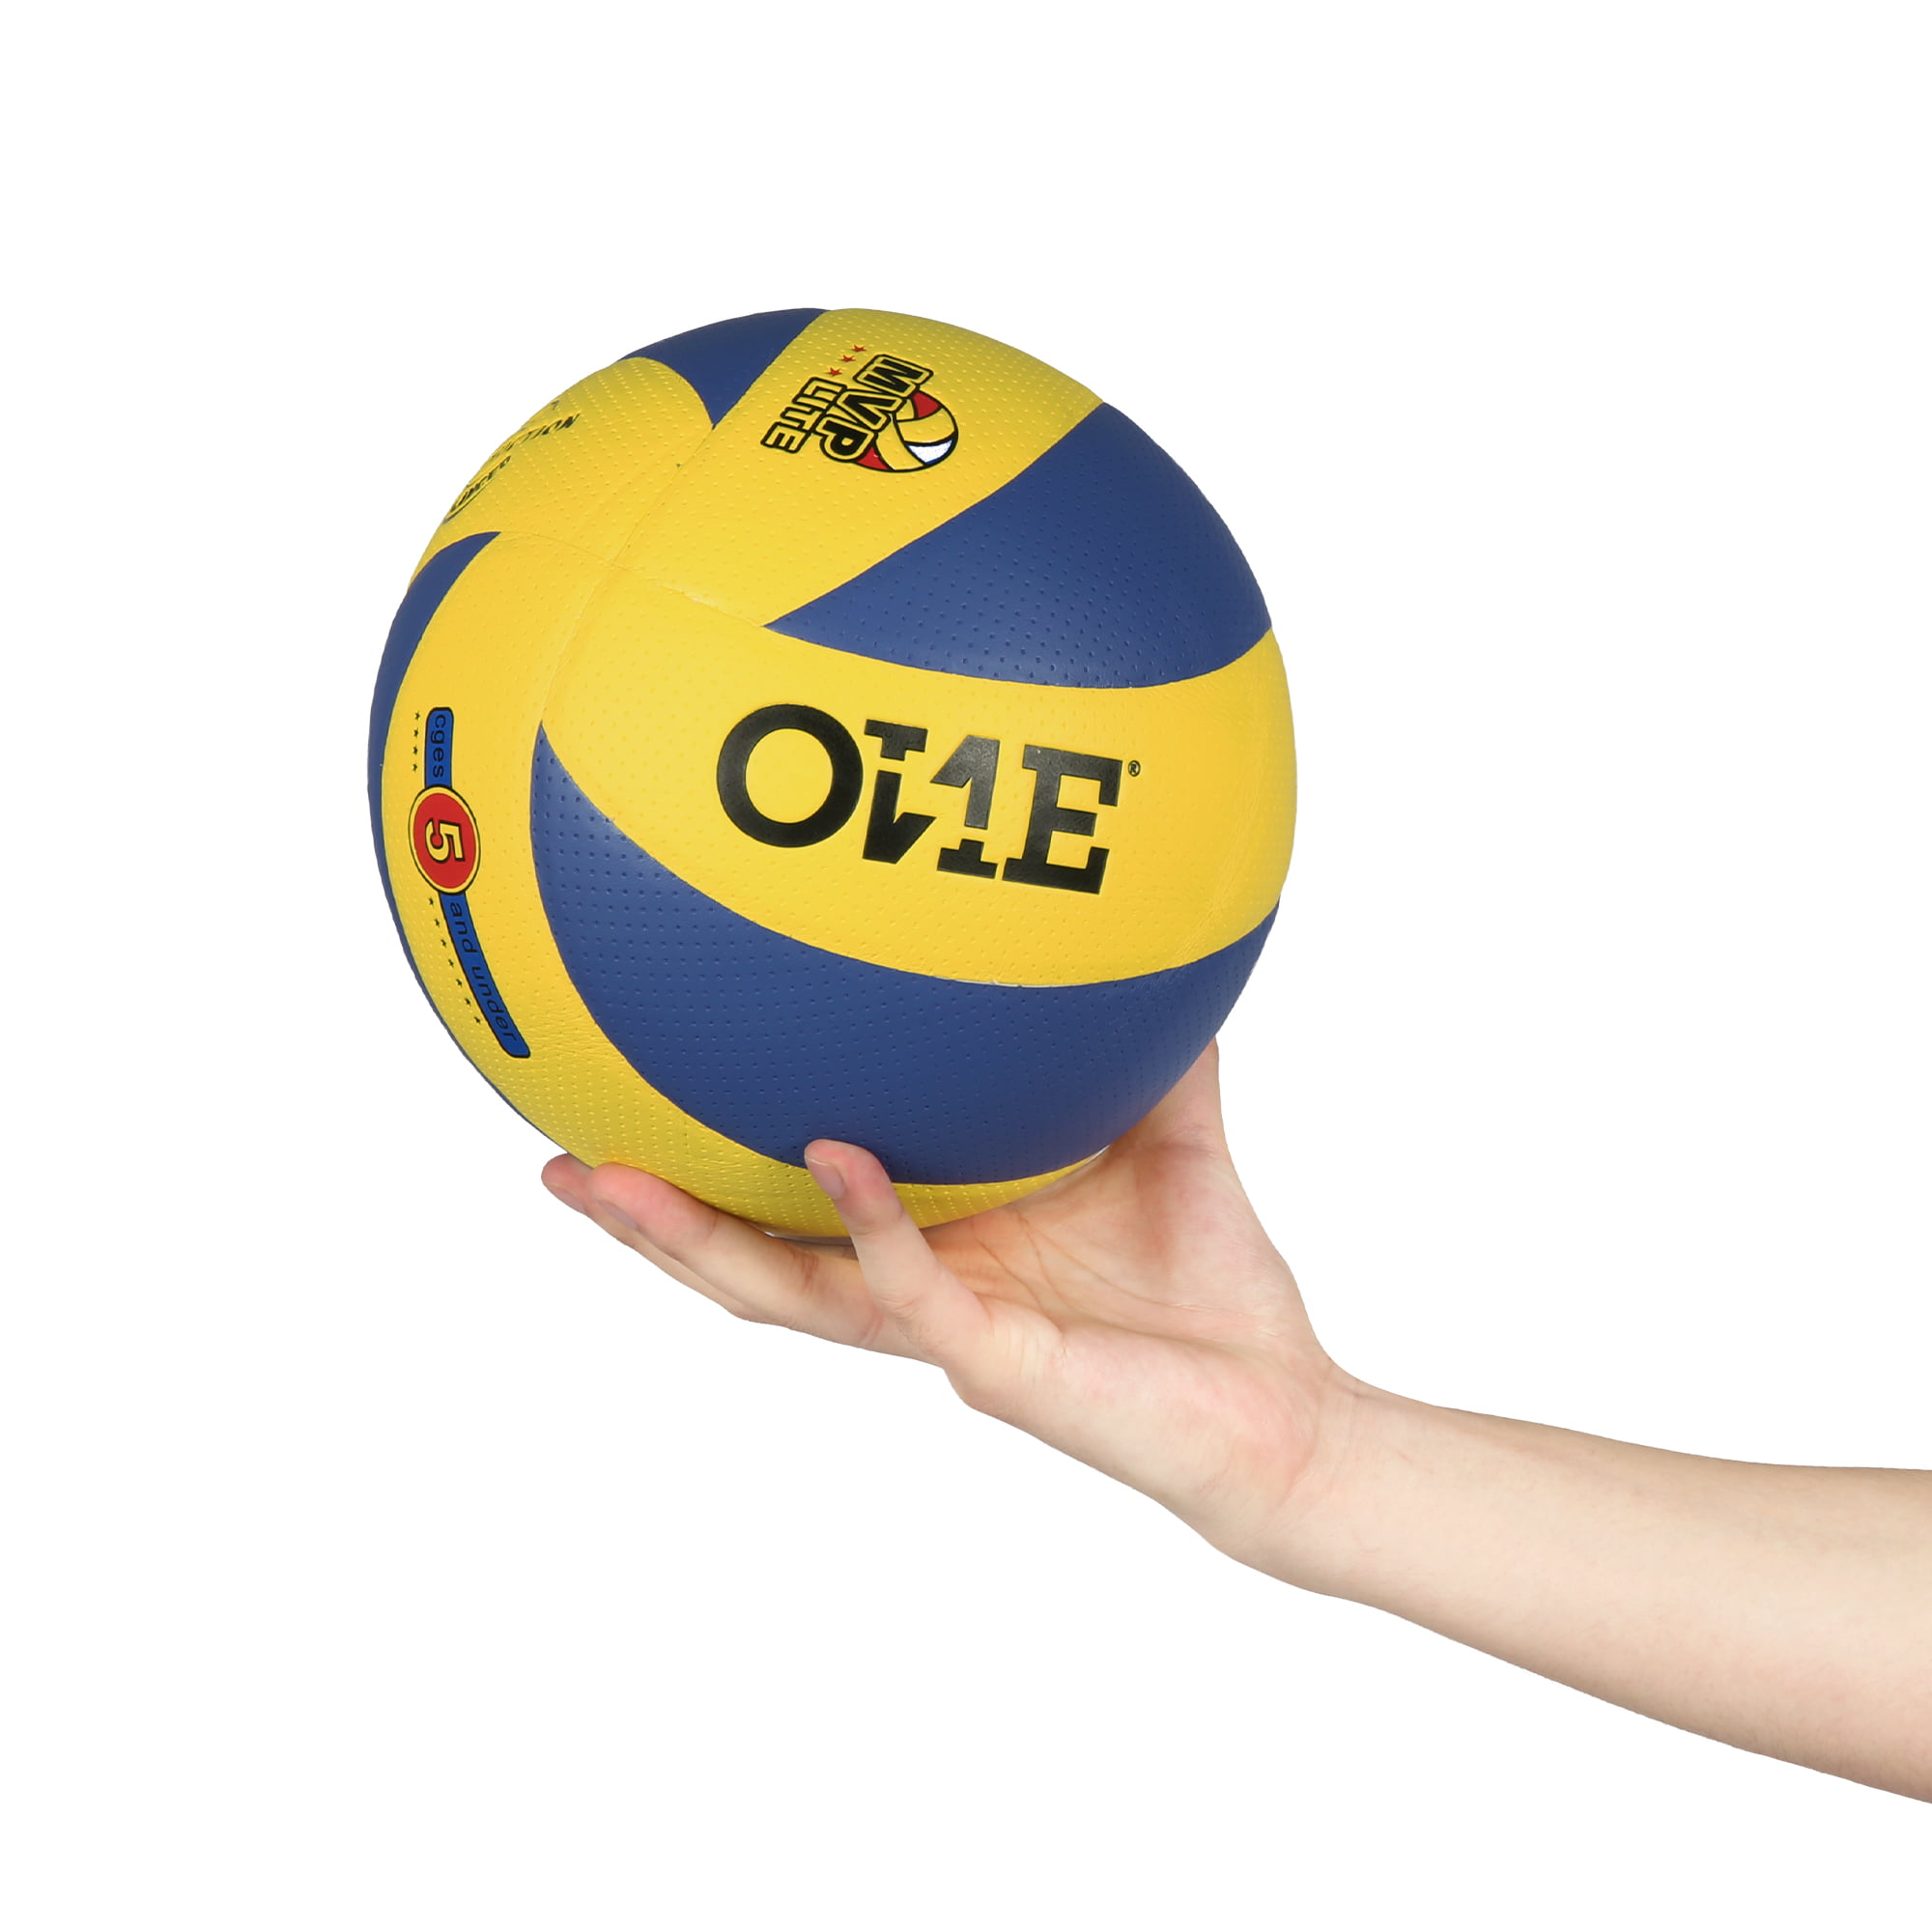 Volleyball Official Size 5,Soft Volleyballs for Kids Youth Adults to Play Games Beginners Training VolleyballI at Backyard Indoor Outdoor and Beach 